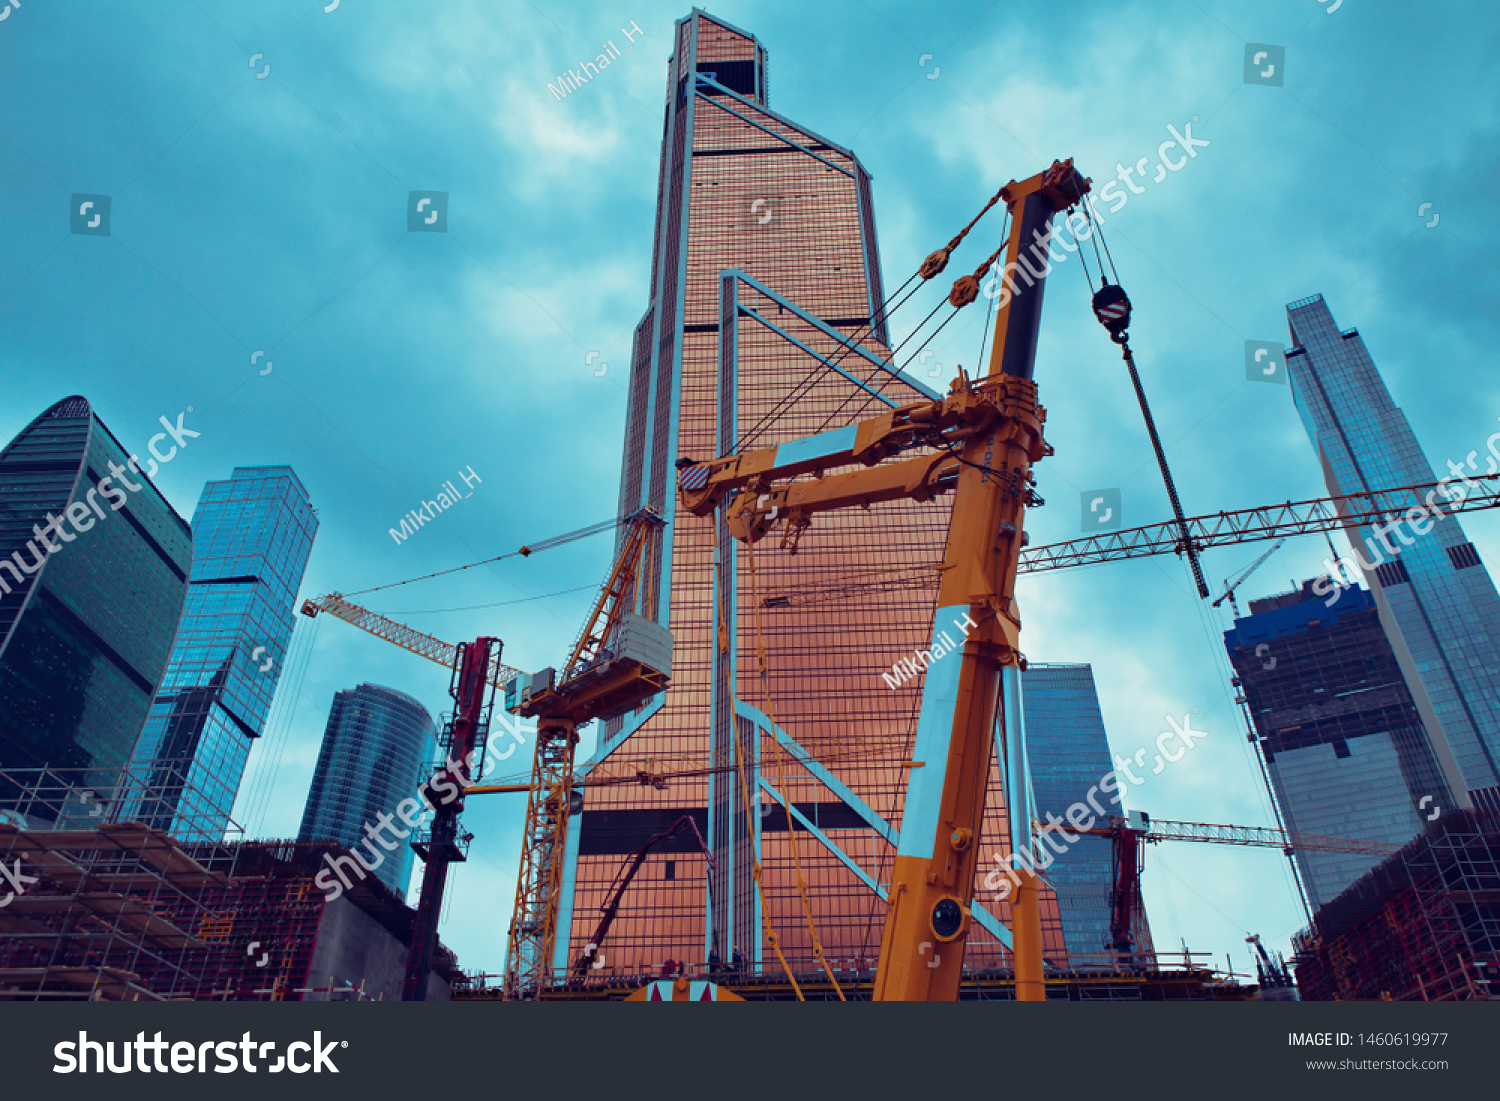 Sky scraper tower construction site with cransSky scrappers construction site #1460619977